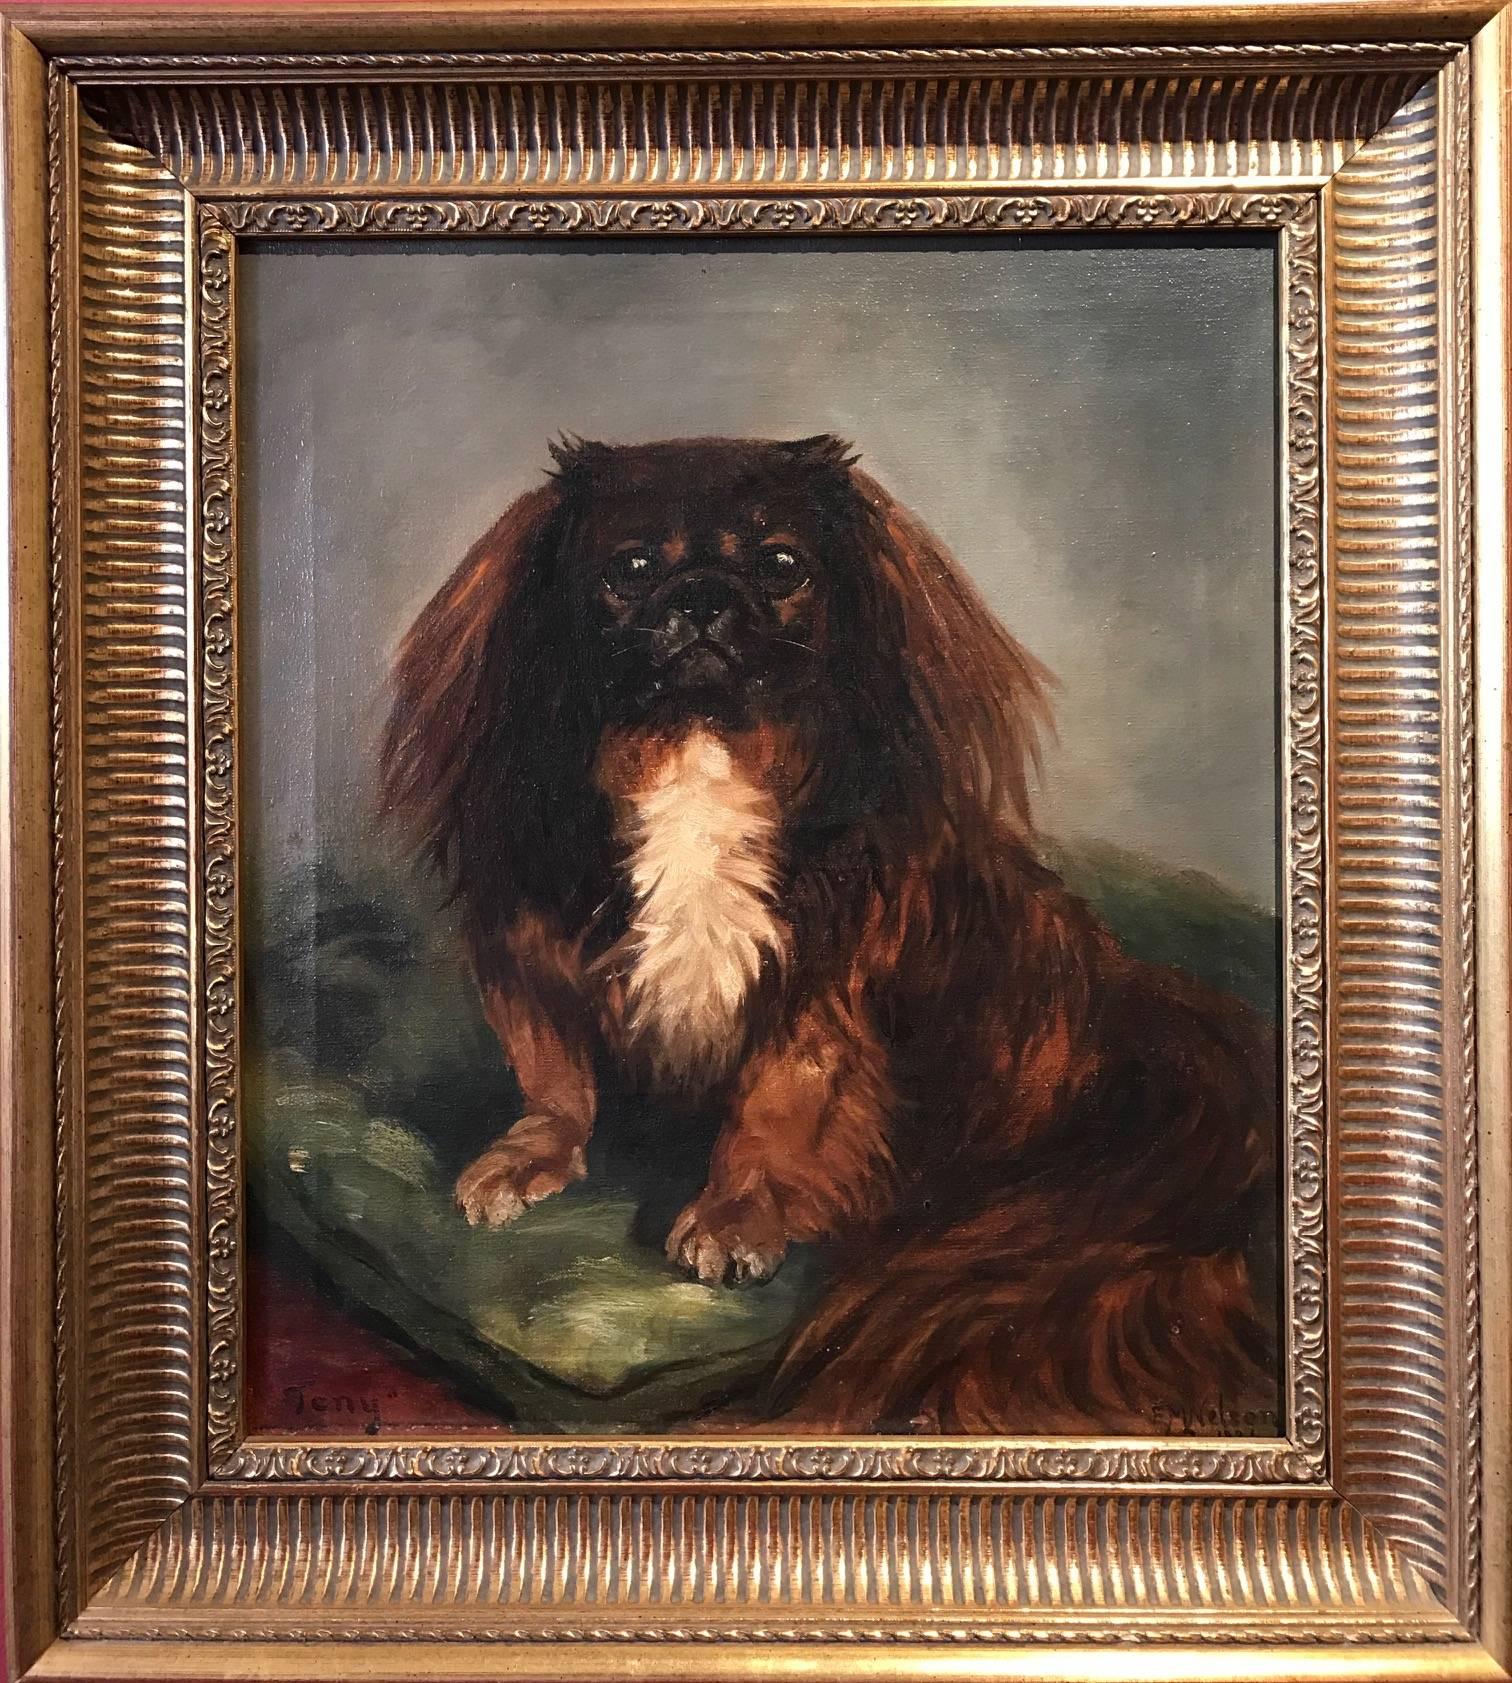 Very fine antique English dog painting, in oils on canvas, depicting this characterful Pekingese dog seated on a cushion. The painting is by the well listed British artist, Miss E. Marion Nelson and is signed, dated 1921 and titled,